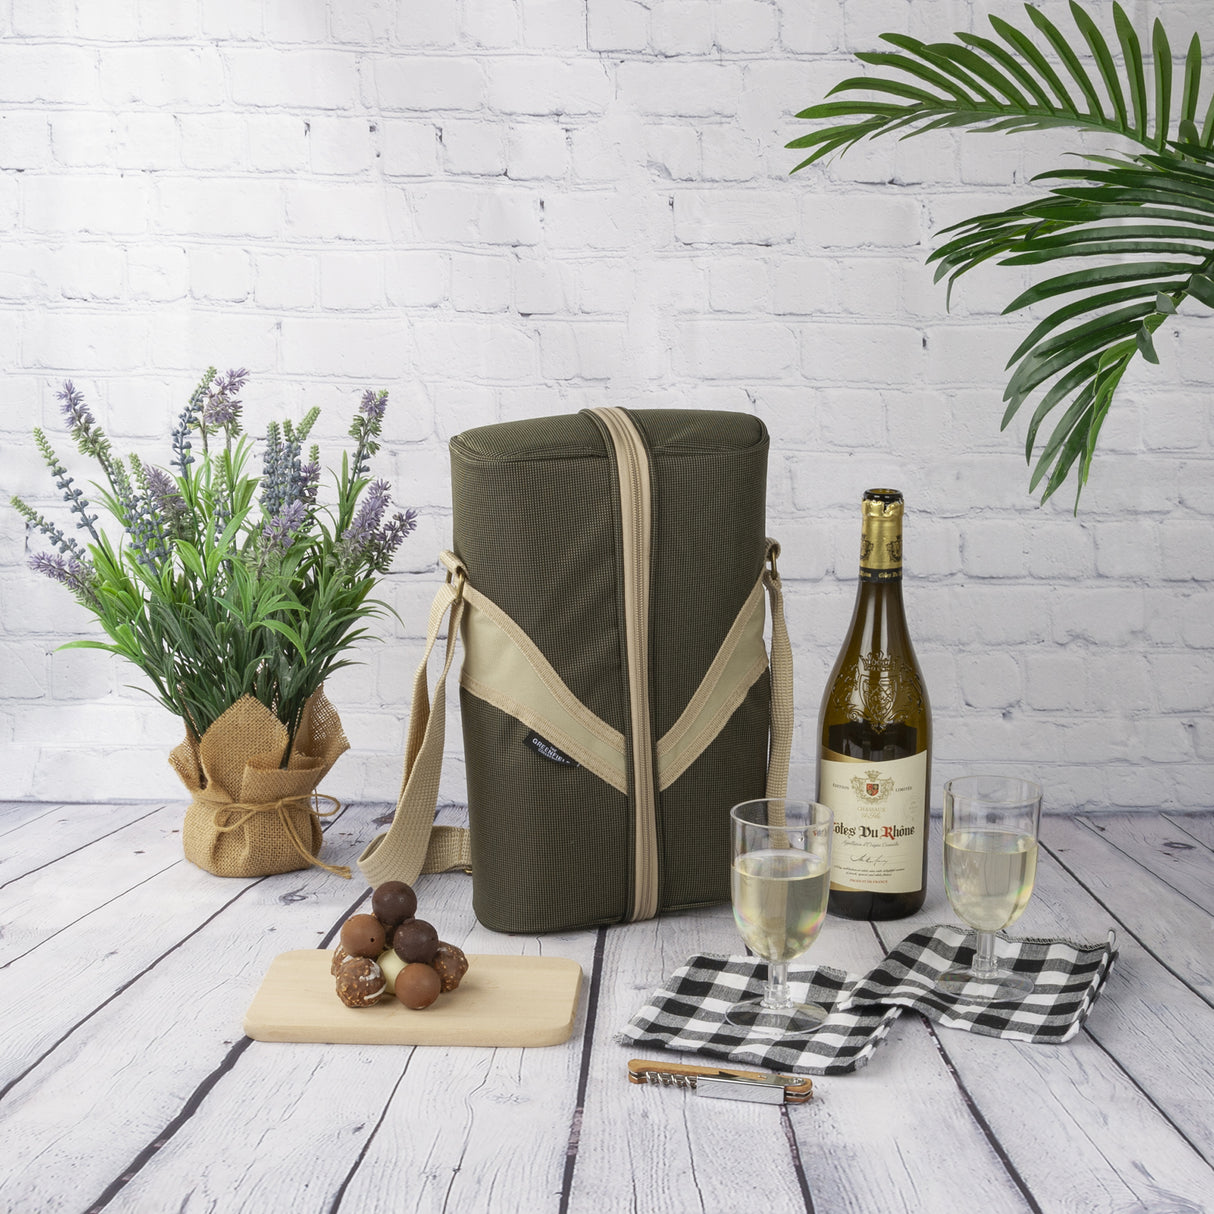 Greenfield Collection Deluxe Wine Cooler Bag for Two People